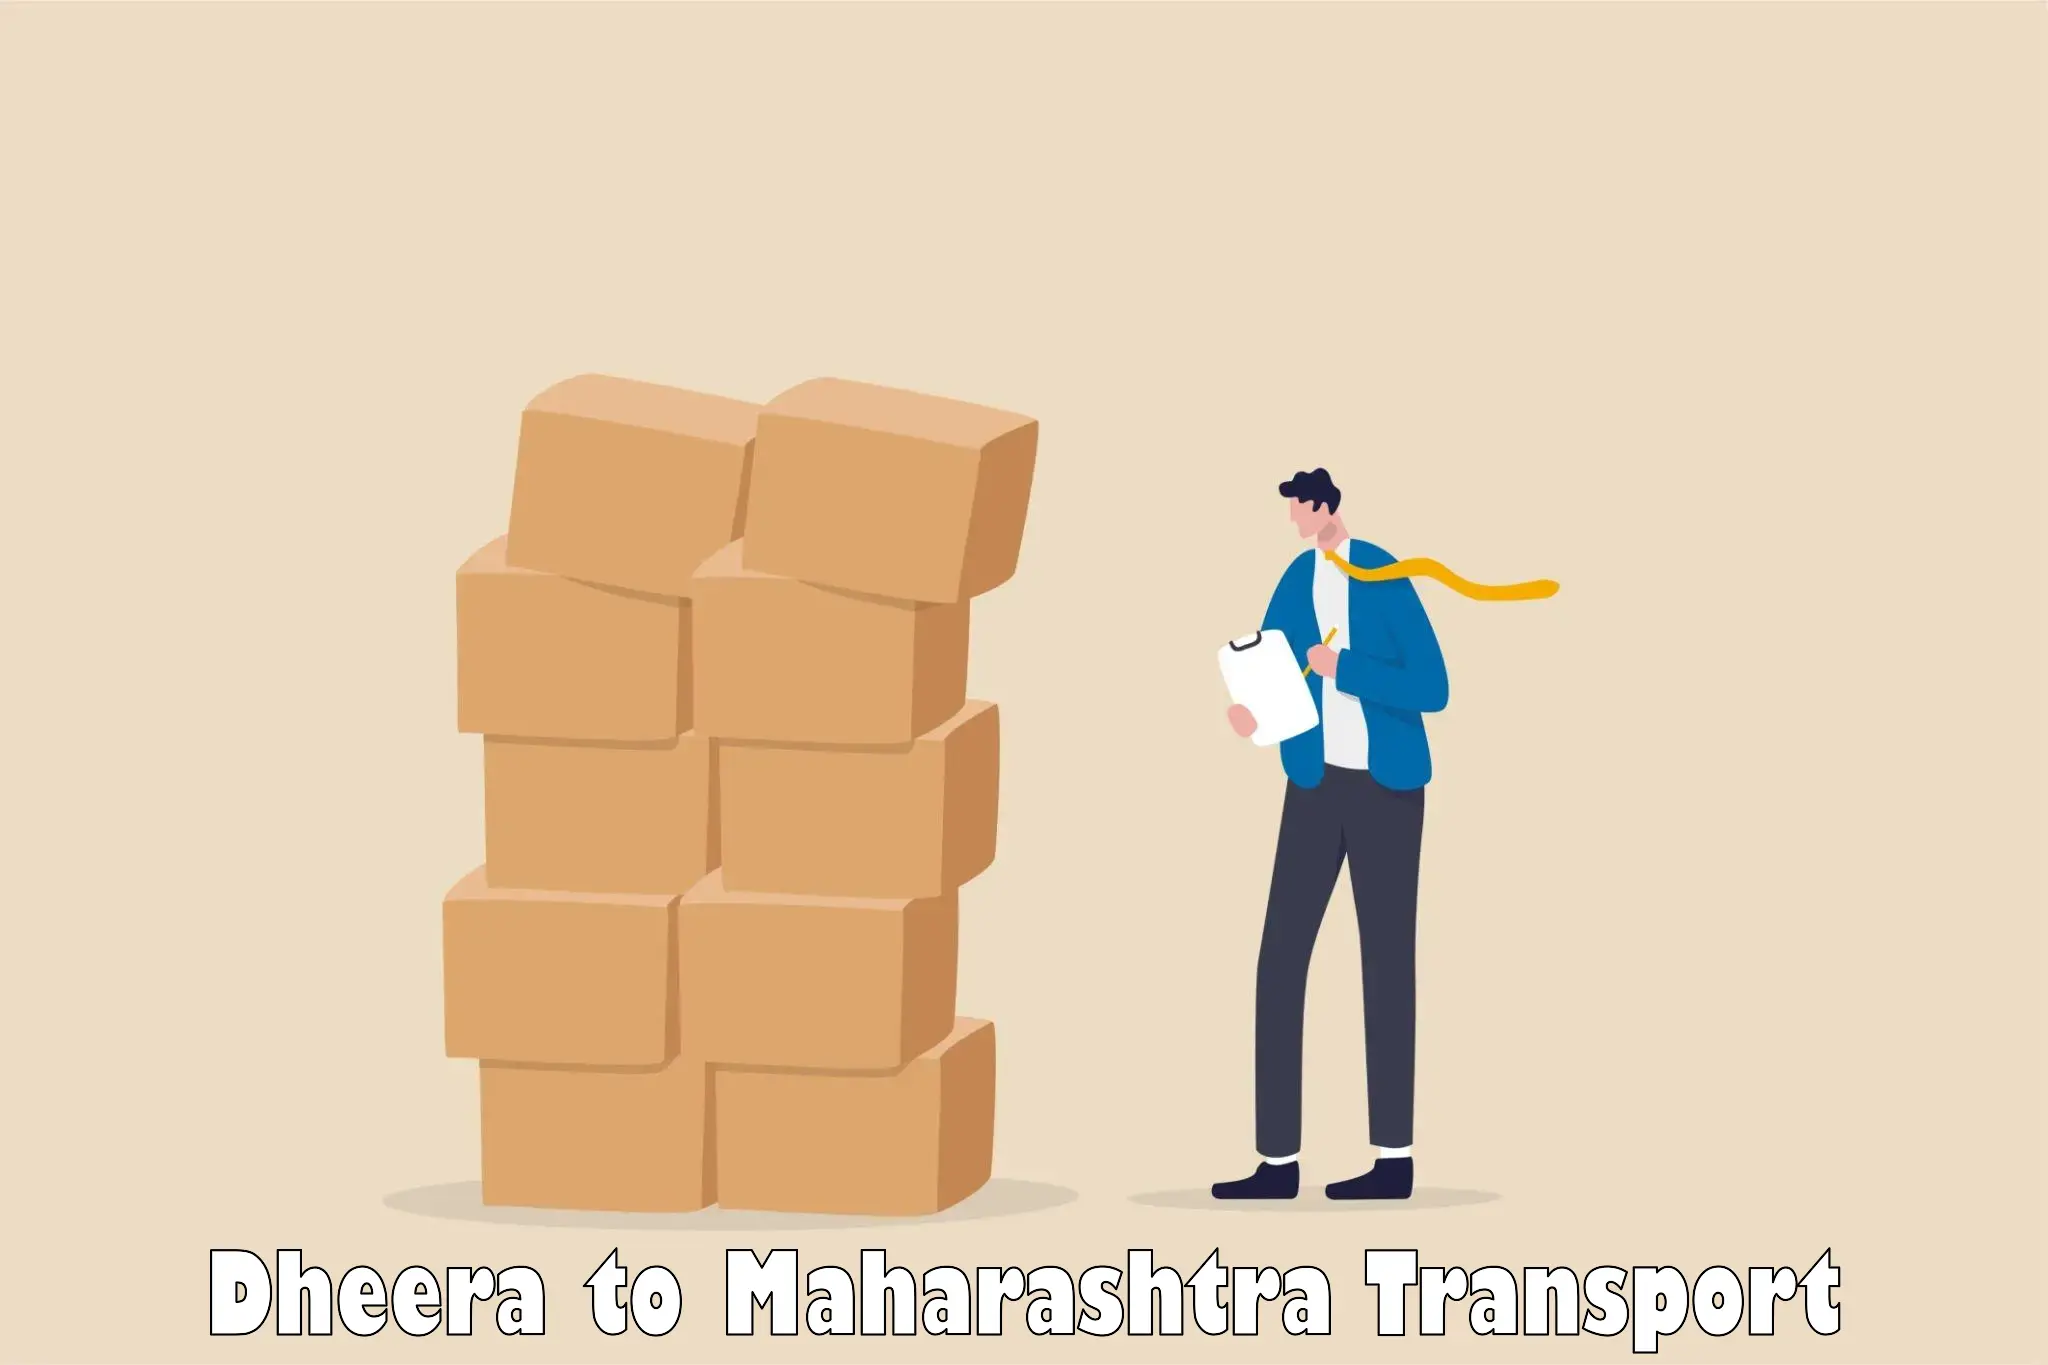 Road transport online services Dheera to Andheri